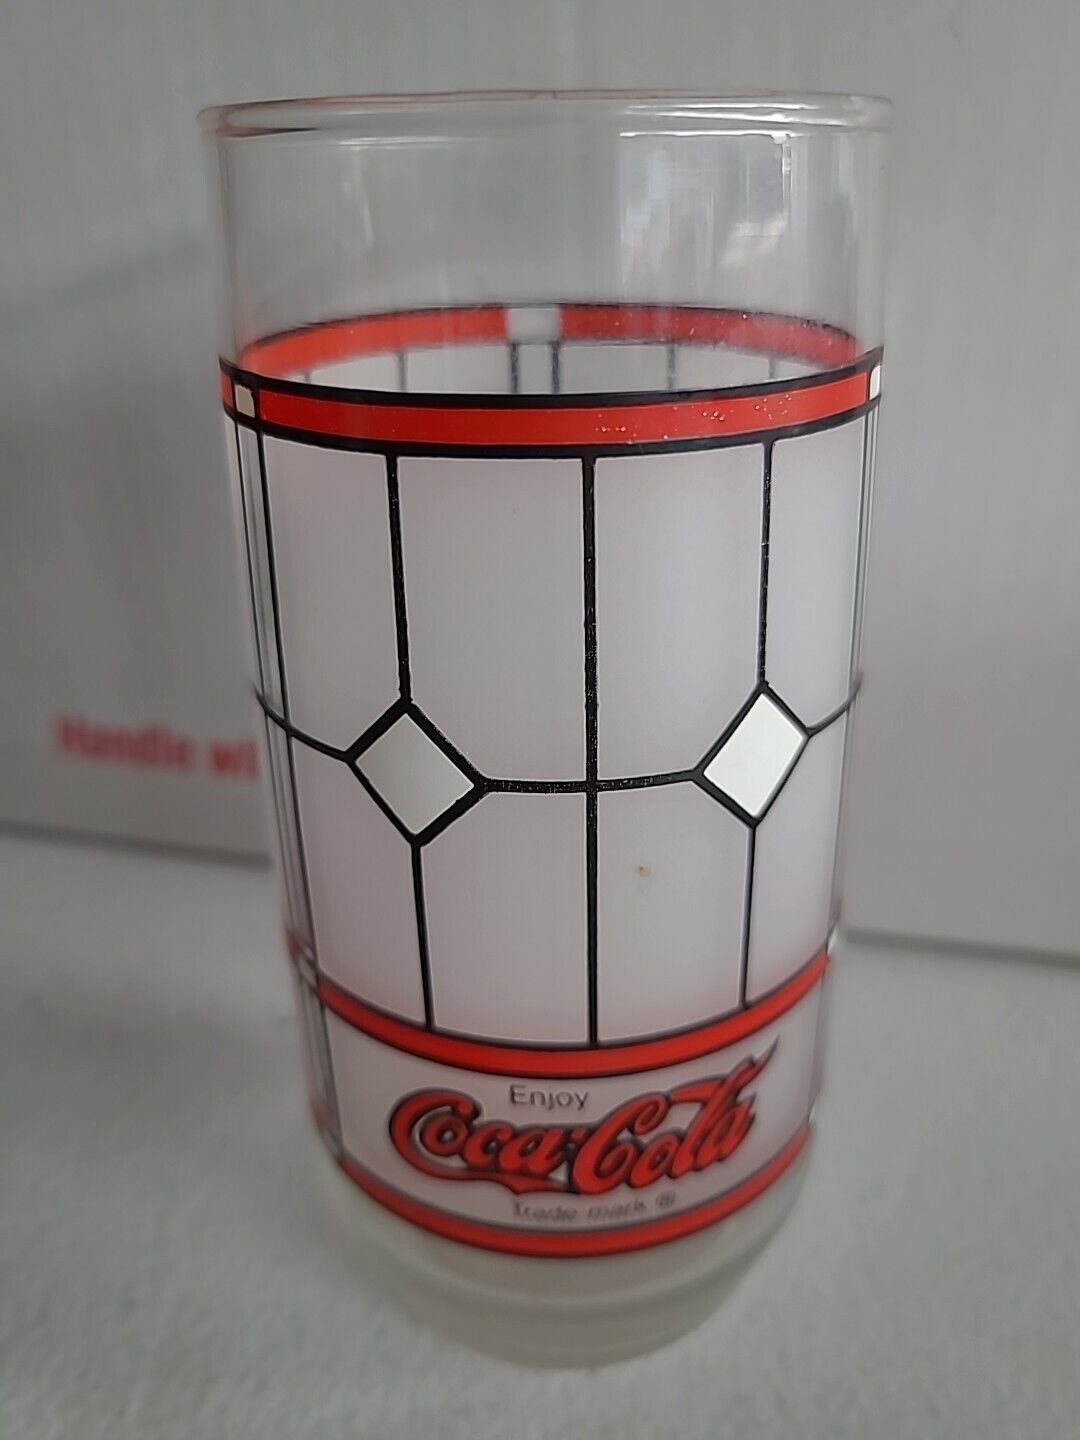 Vintage Coca-Cola Glass Collectable Coke Drinking Glass BEAUTIFUL VIBRANT GRAPH